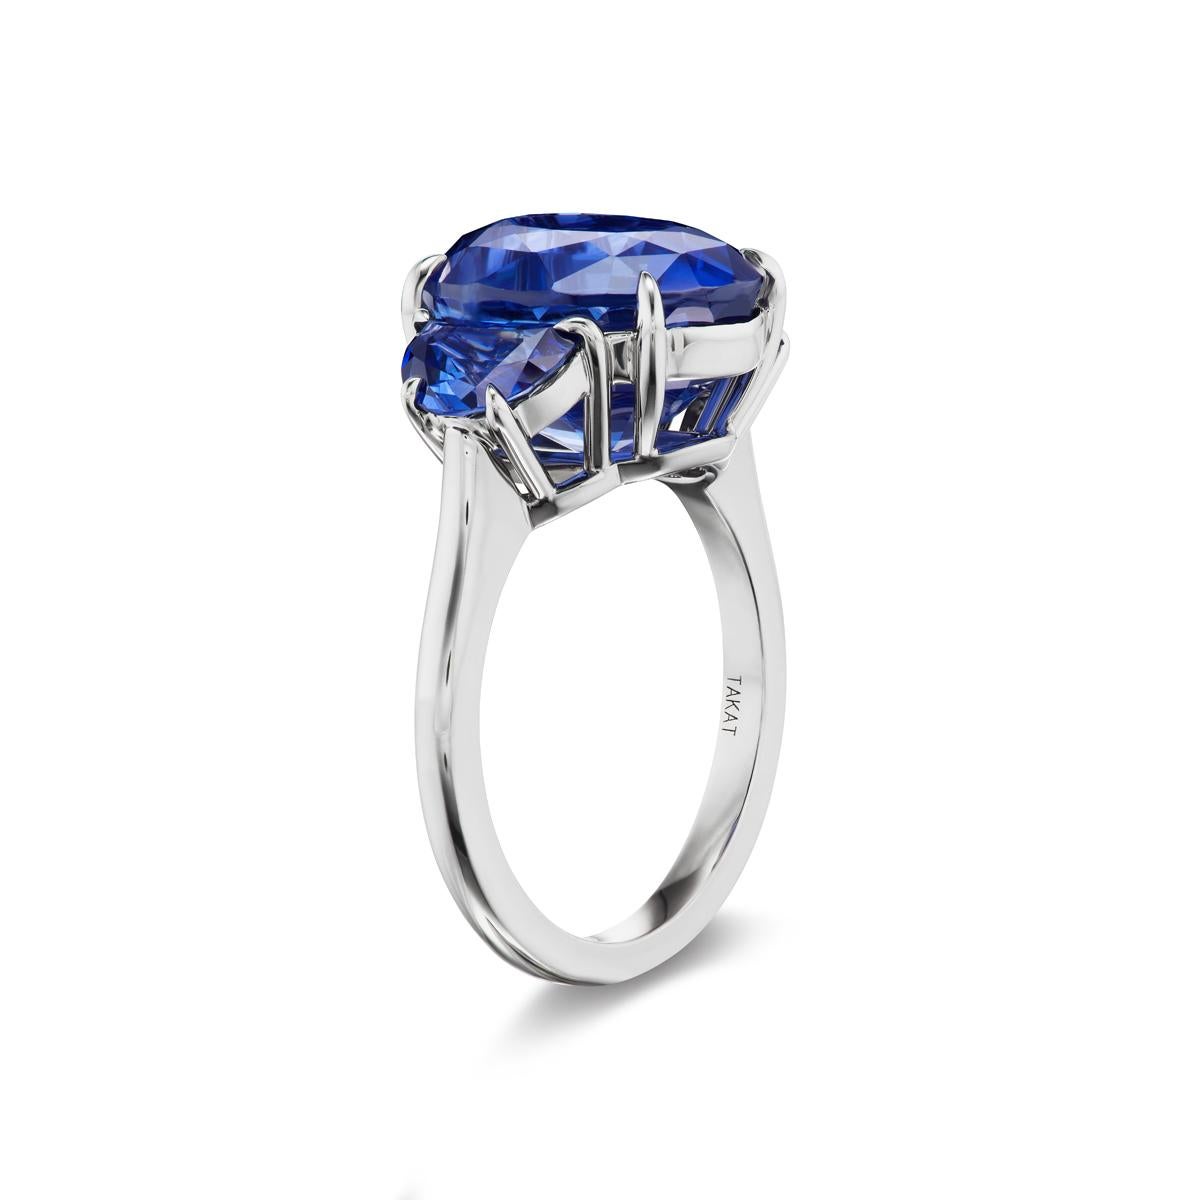 Oval Cut Magnificent Oval Sapphire Ring